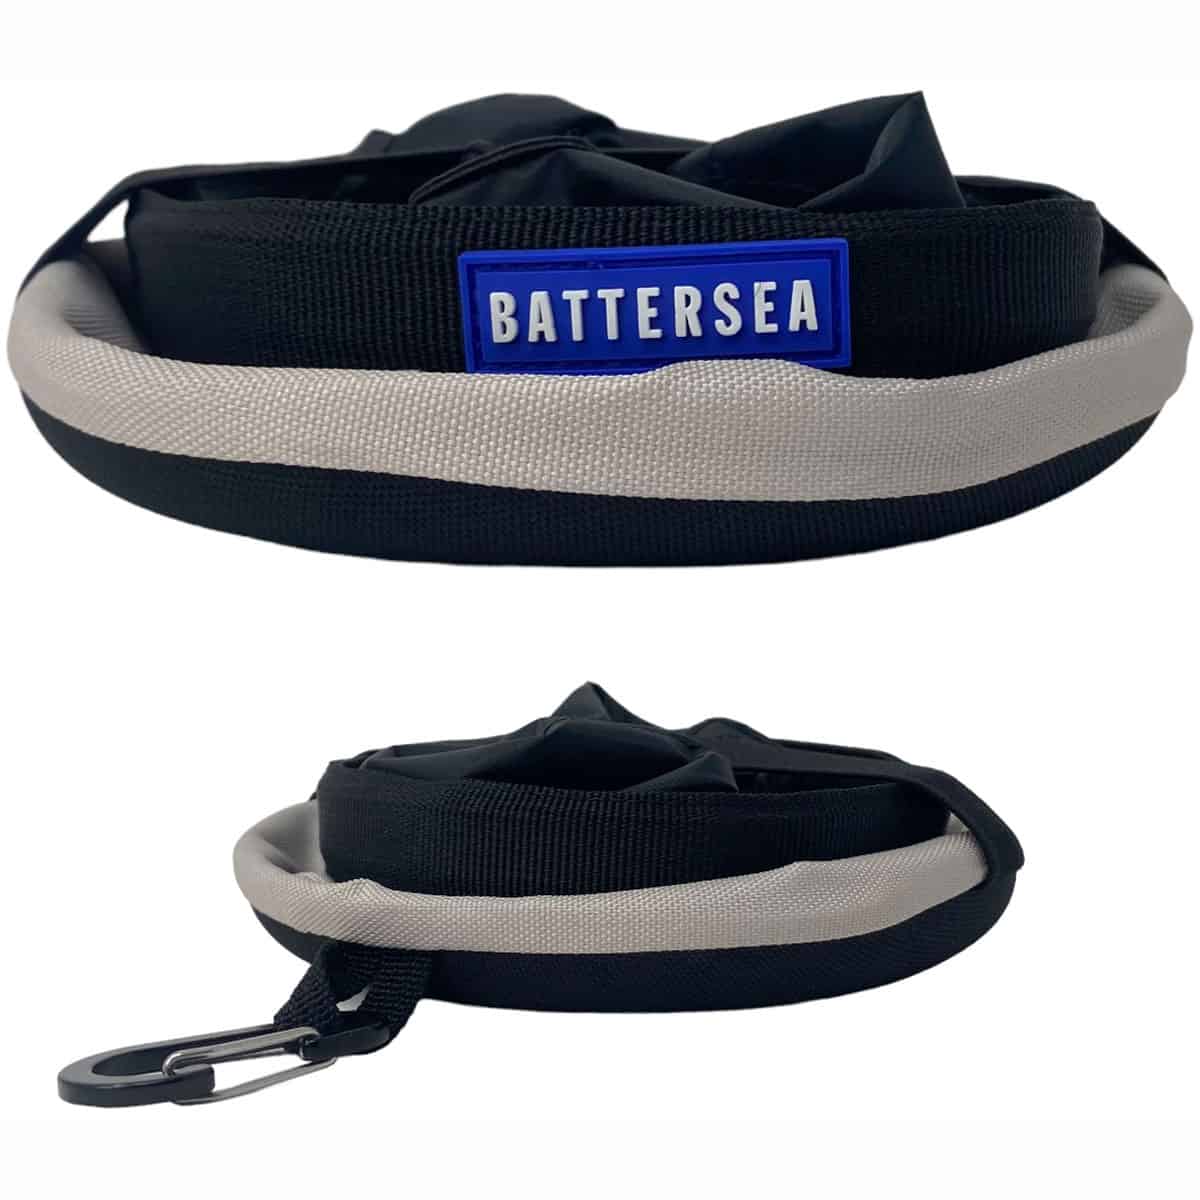 The Battersea Collapsible Pet Food Bowl: Fun mealtime for your furry friends wherever you are - collapsed side view